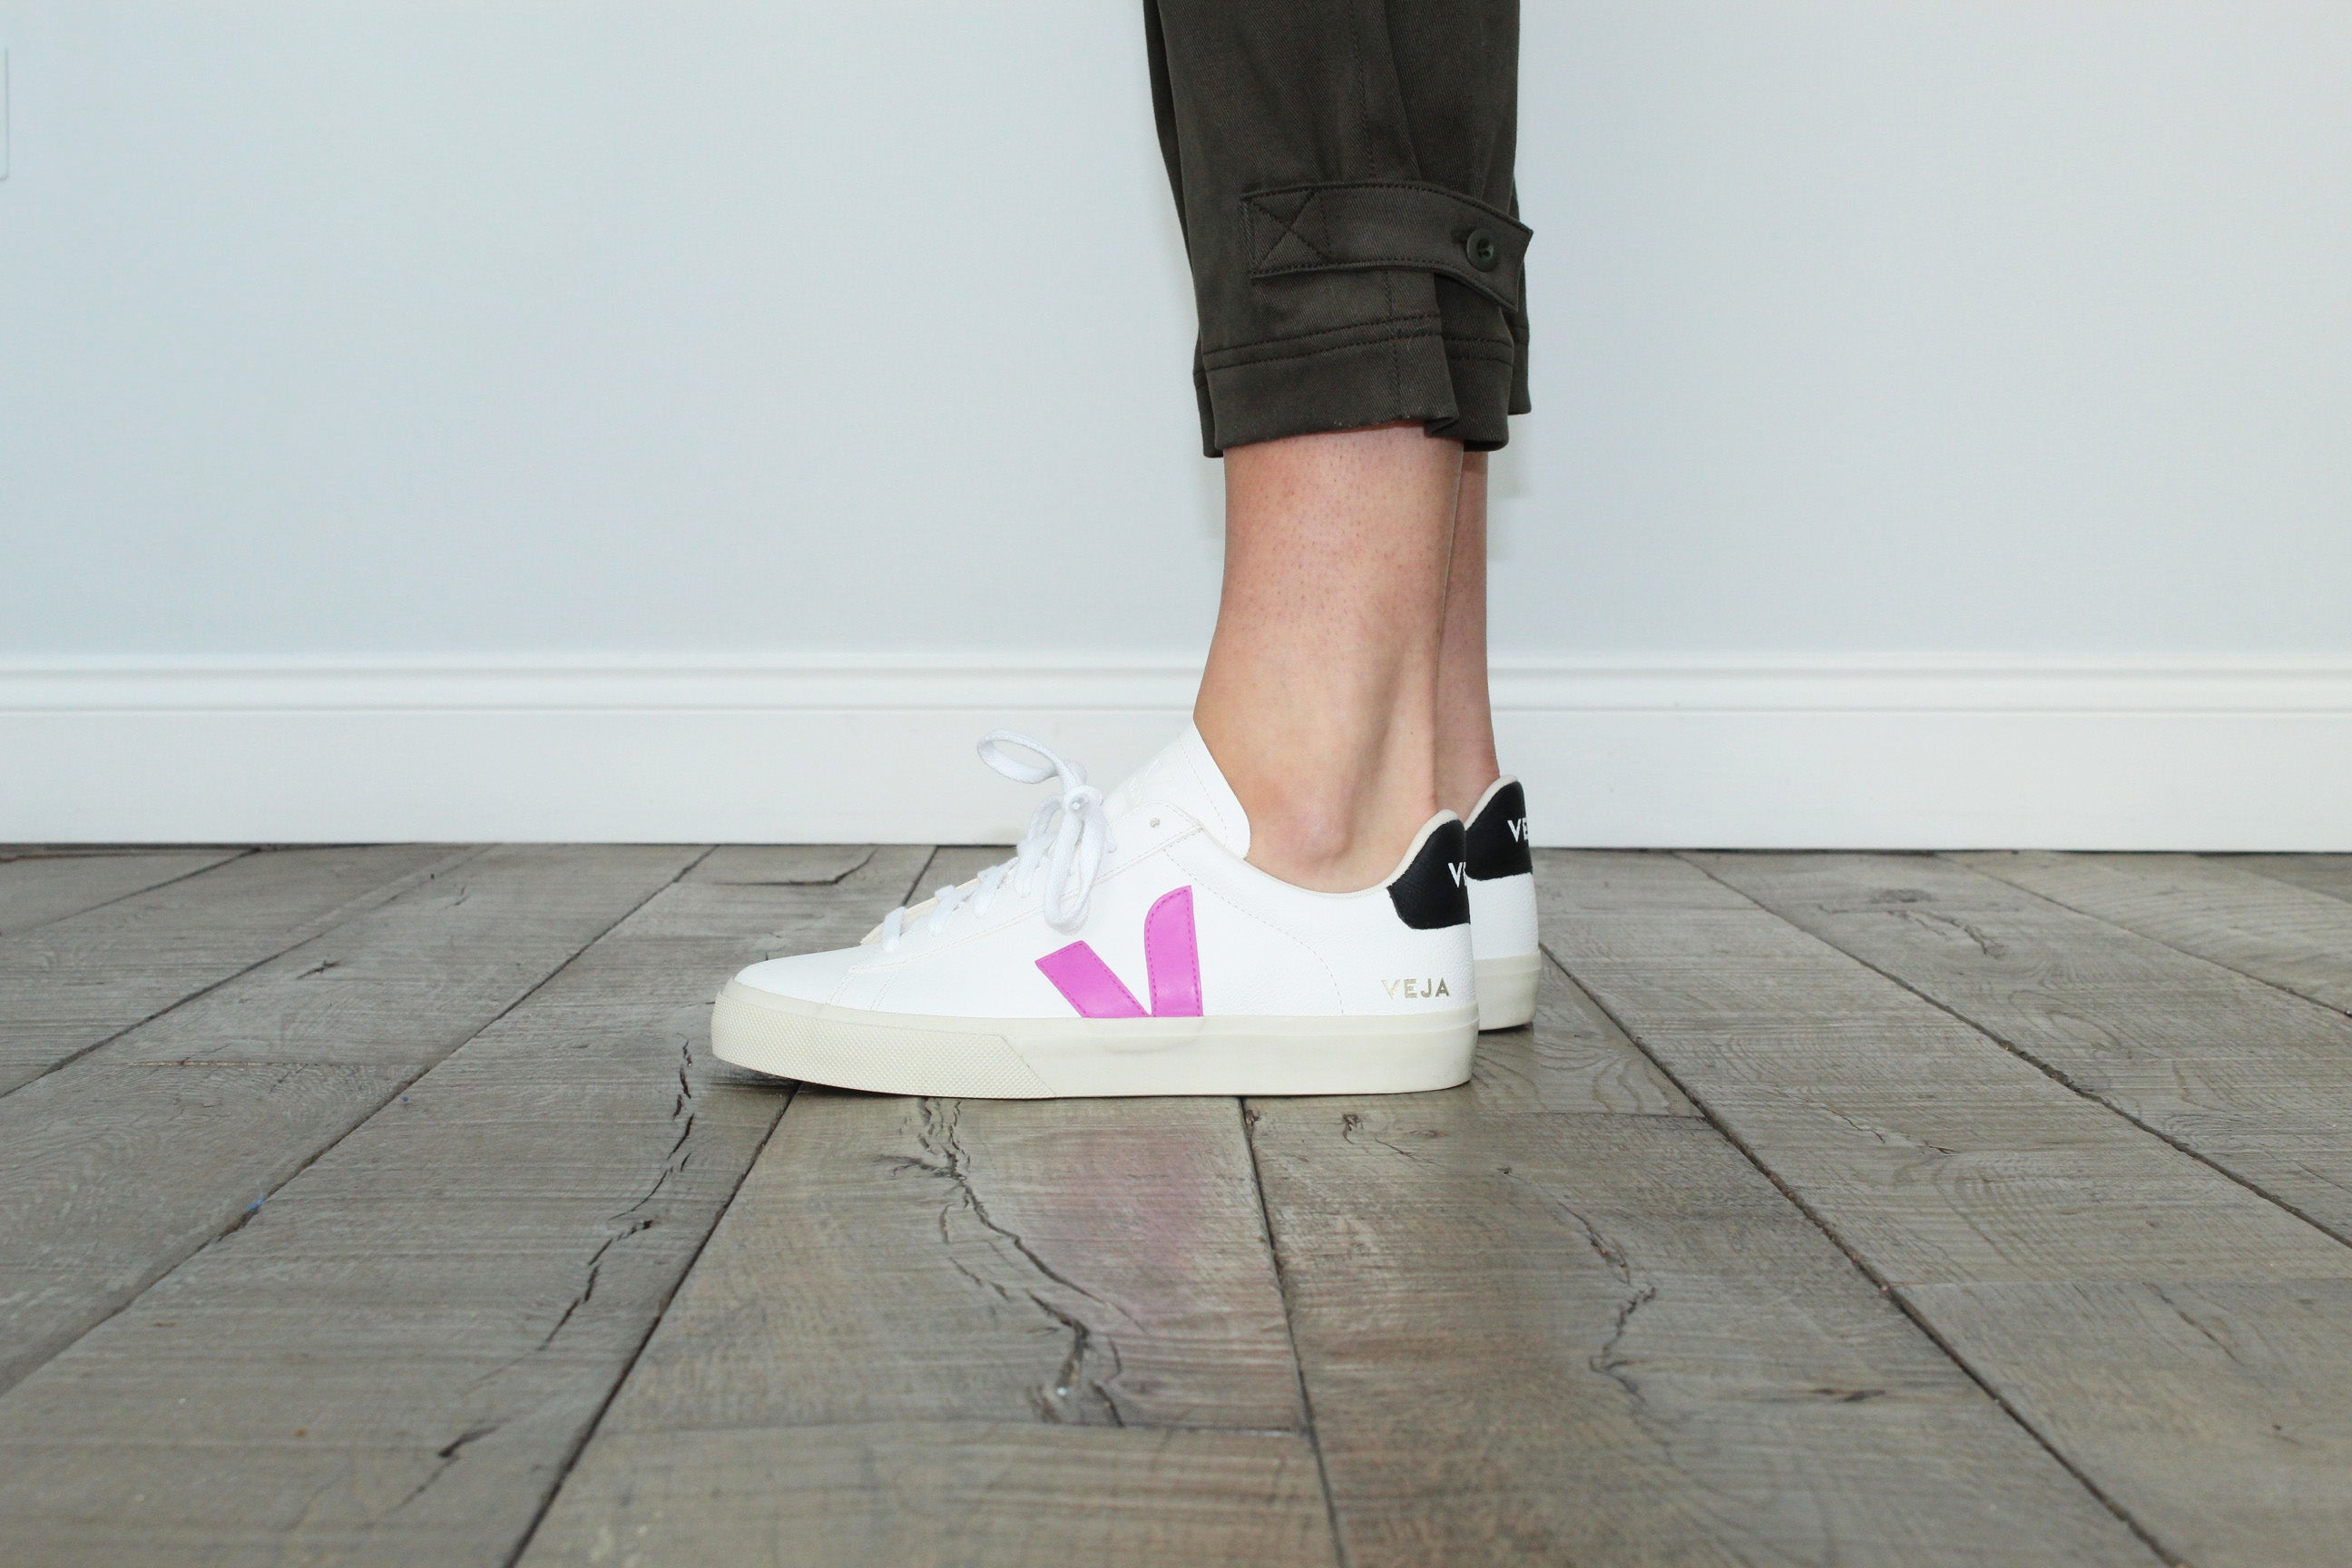 VEJA 52691 Campo Chromefree Trainers in White and Ultraviolet